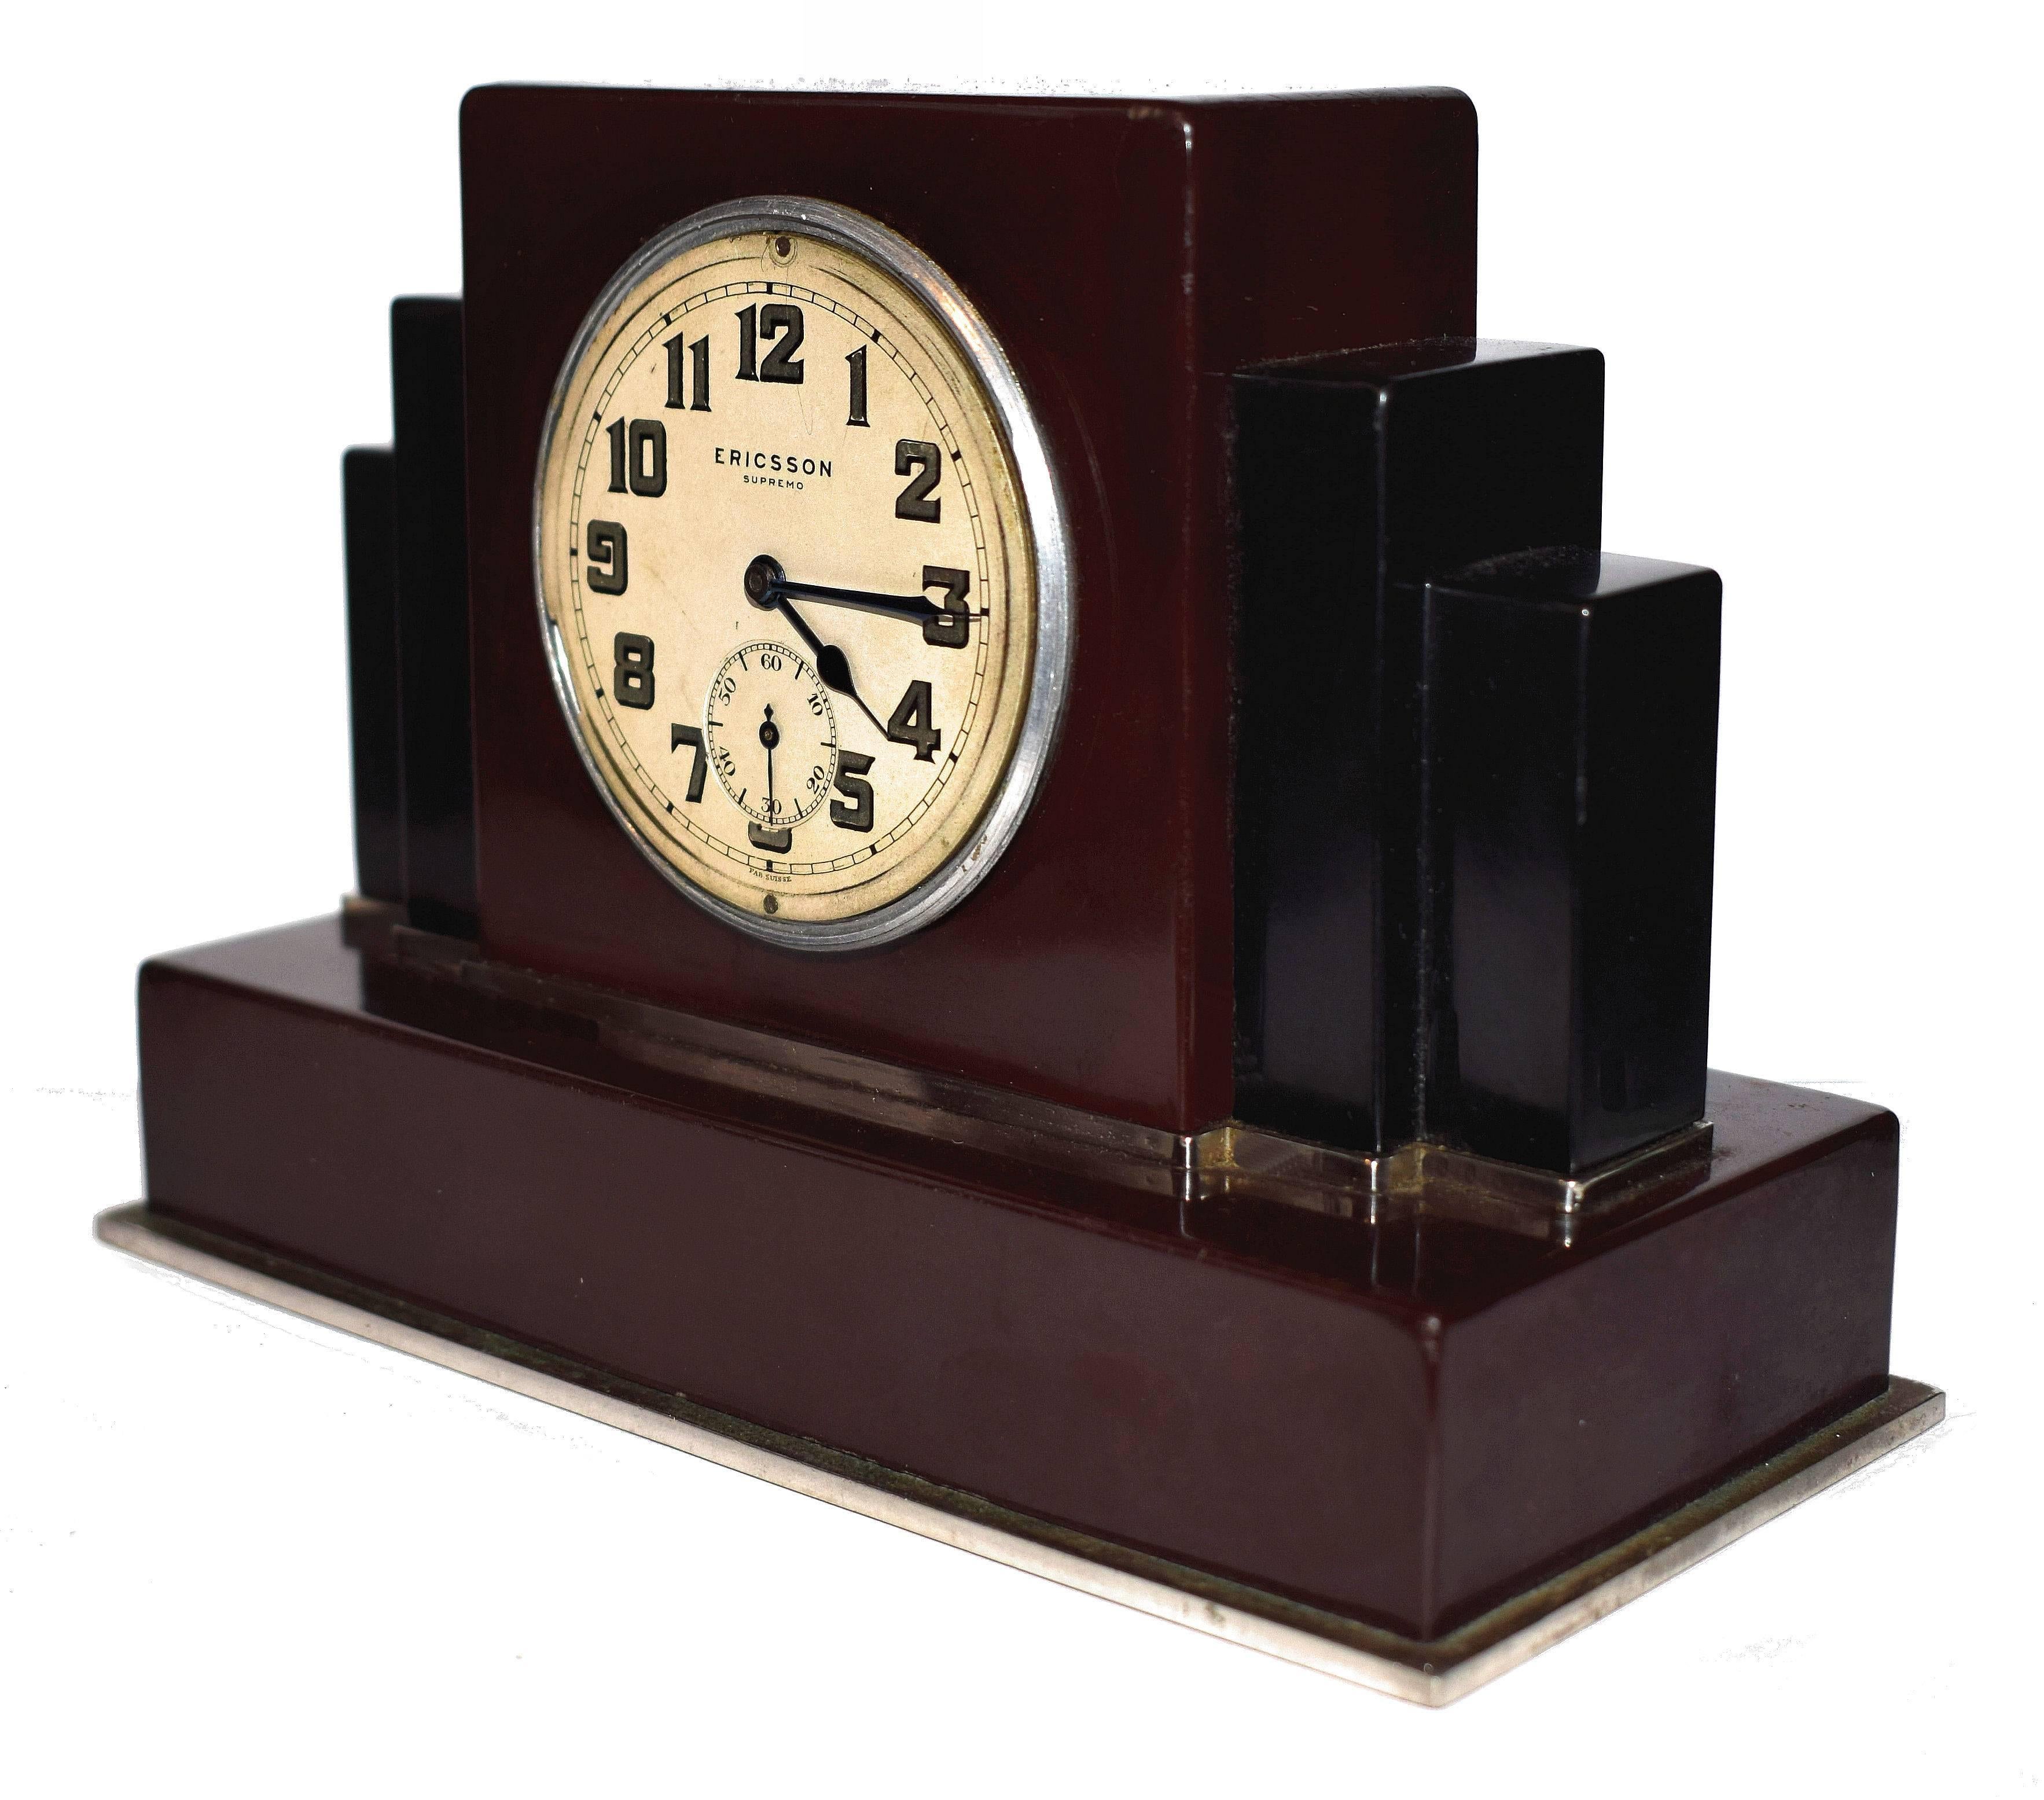 Superb 1930s Art Deco bakelite clock by the Swiss clock makers Ericsson. Very stylish and iconic bakelite case with stepped or skyscraper shape. The bakelite is deep red and black with chrome trim accent around the base and second-tier. This is a